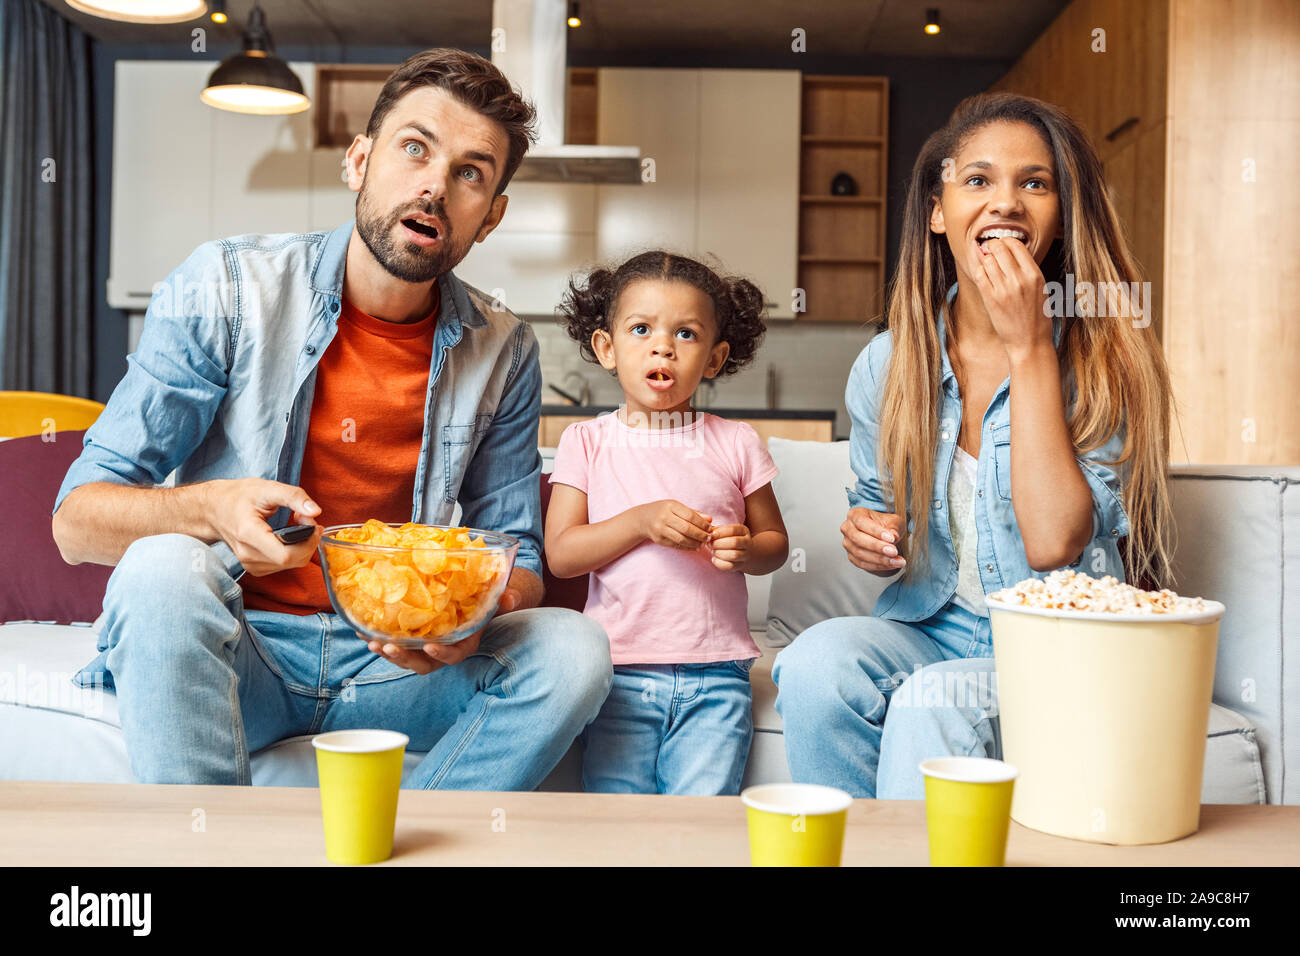 Family watching tv, eating chips and spending day together at home Stock Photo